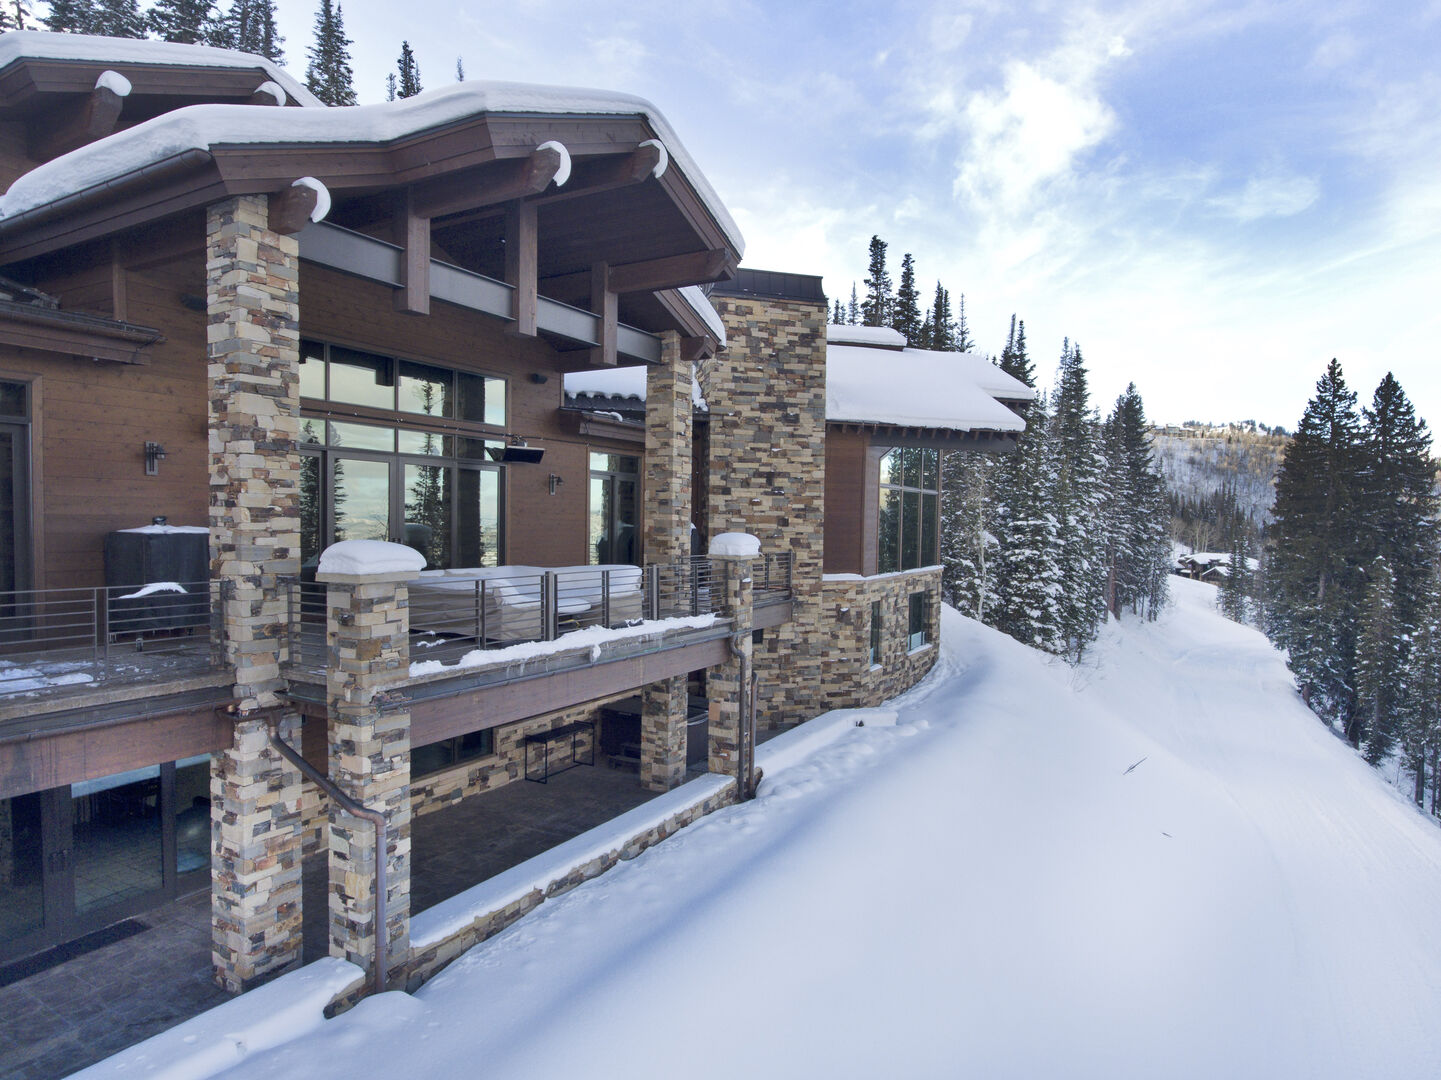 View our ski-in ski-out homes for rent in Park City, Utah